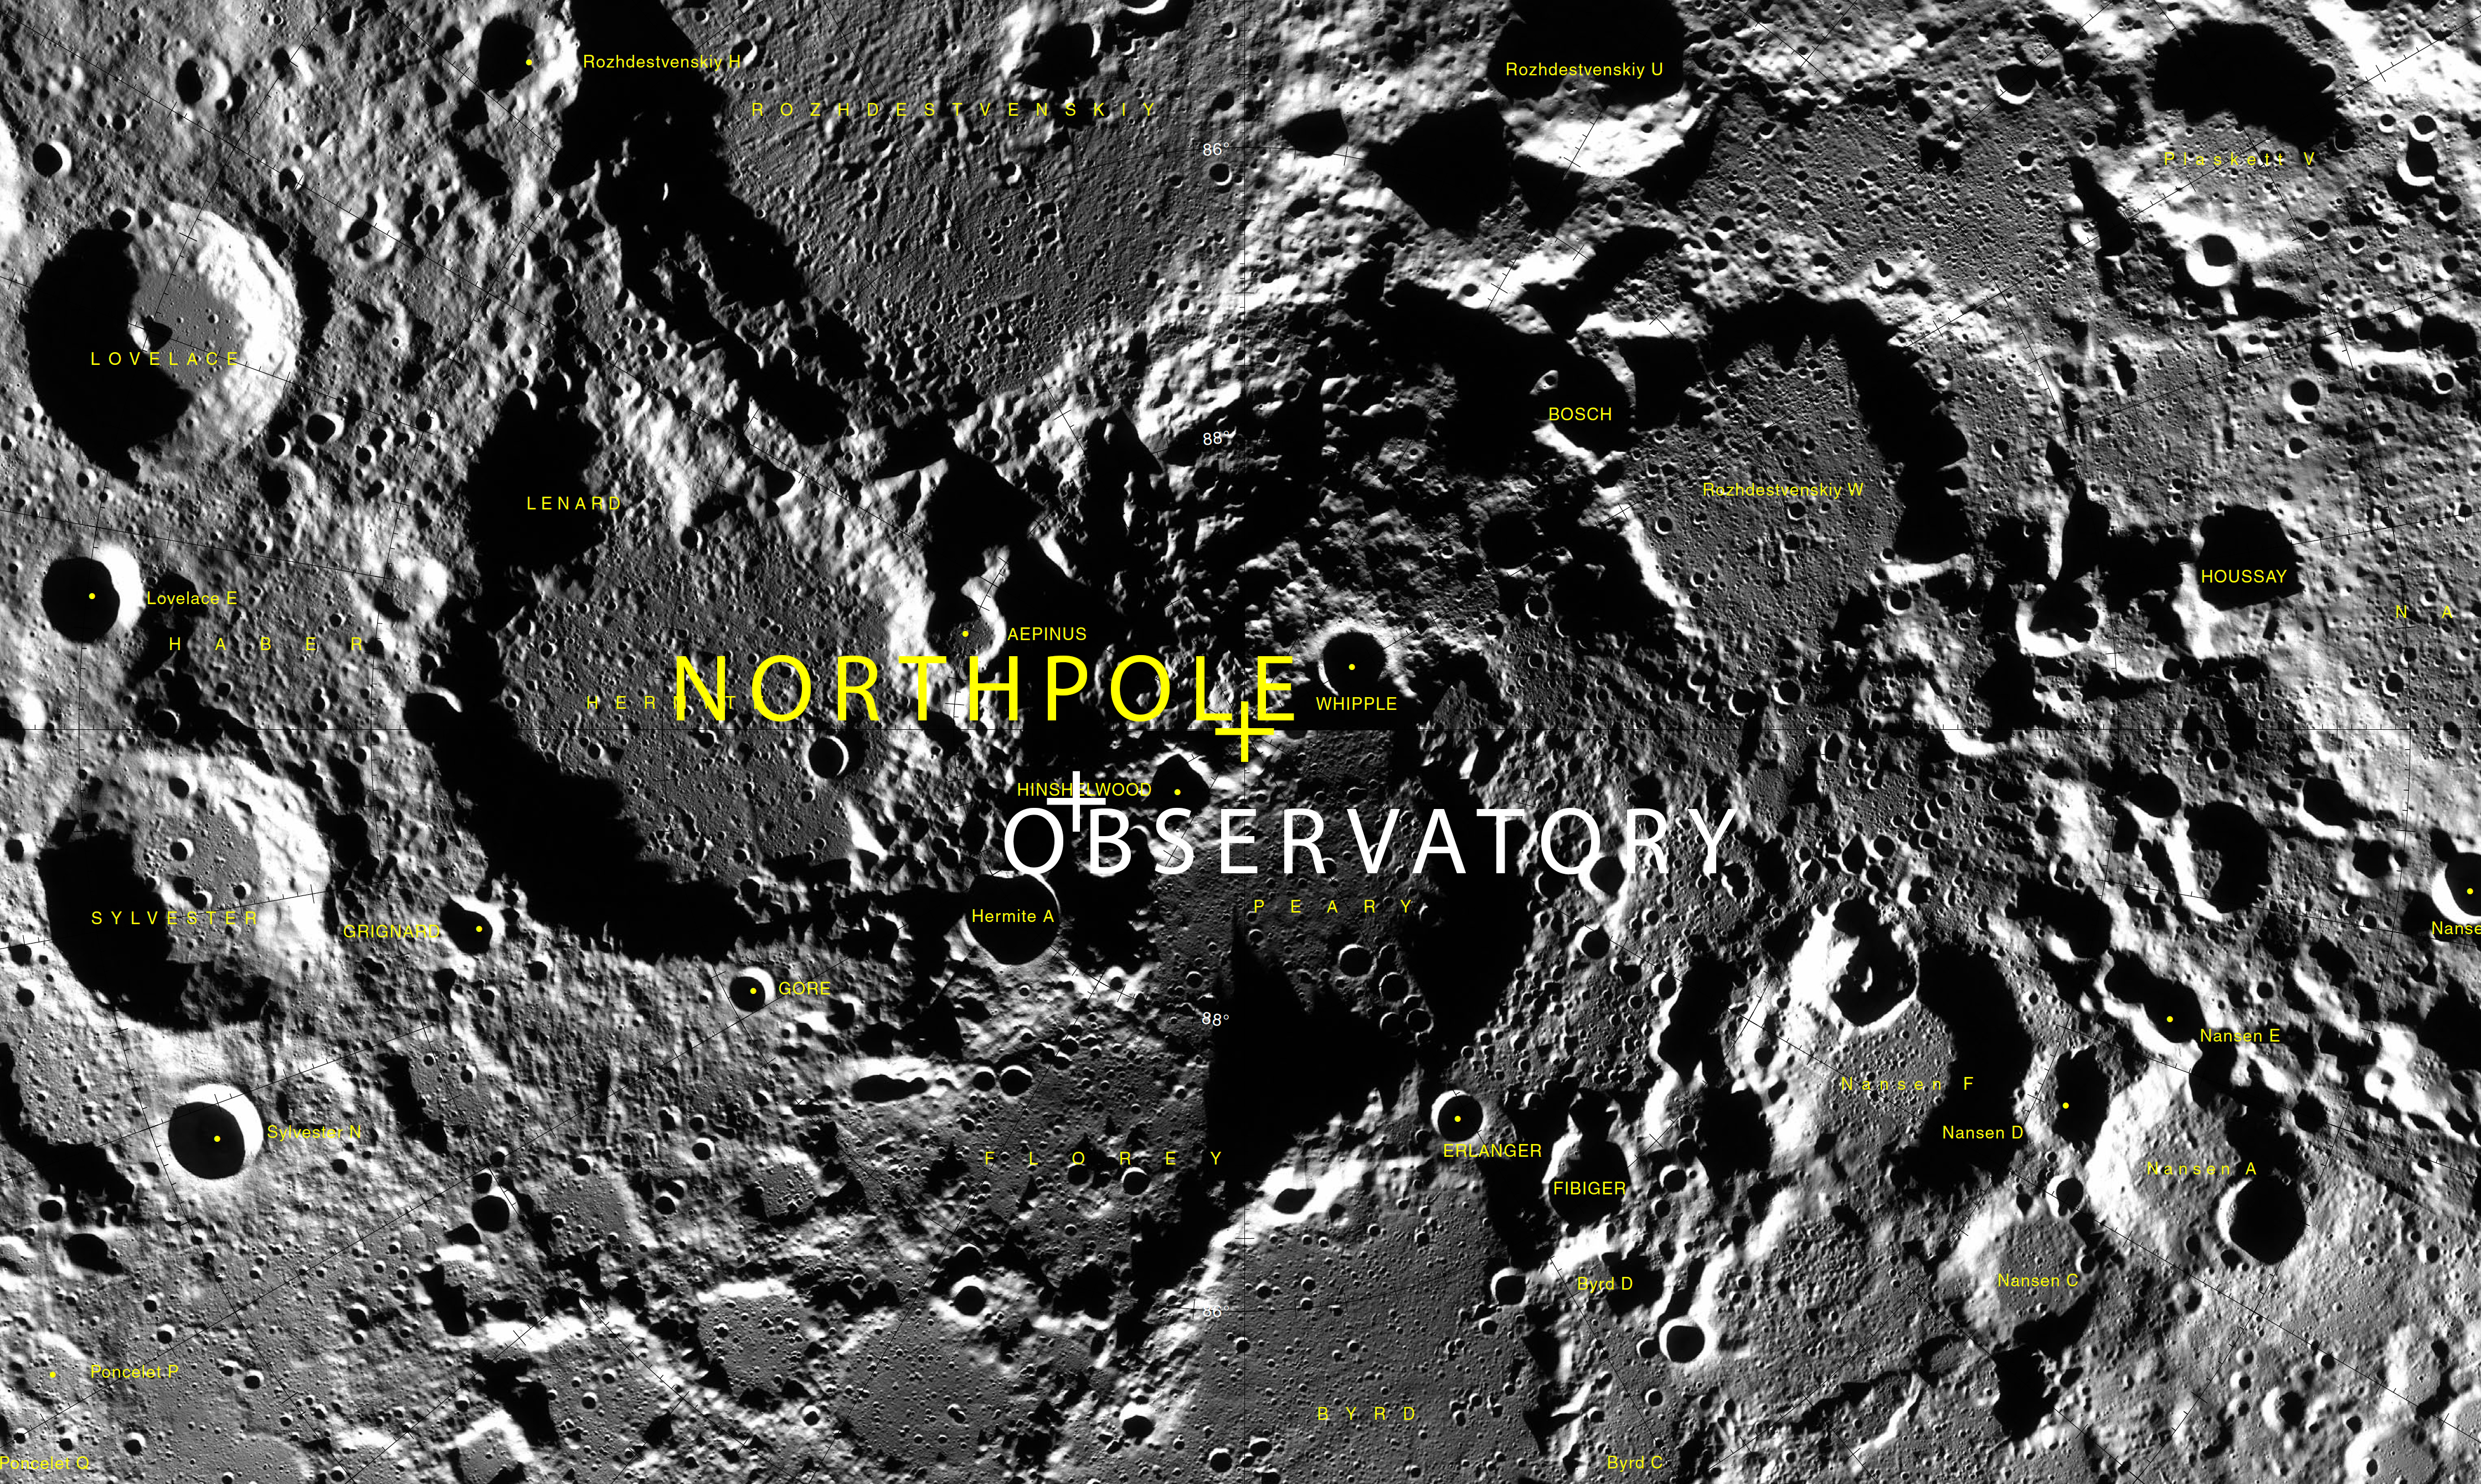 Proposed position of the observatory of the earth on moons 88°50'48 North and 63°44'48 West